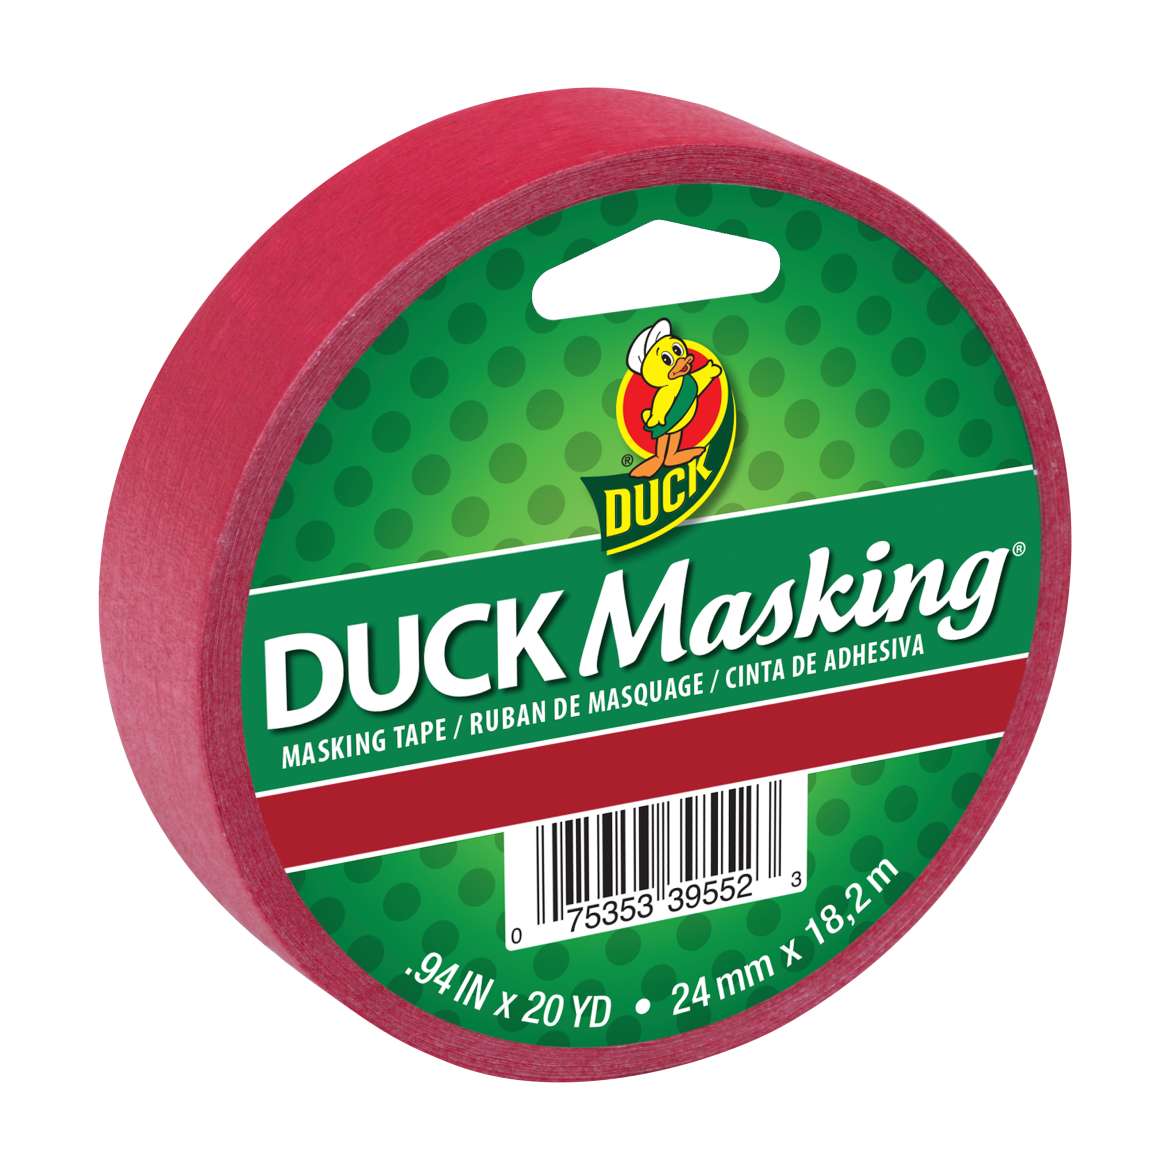 Duck Masking® Brand Masking Tape - Red, .94 in. x 20 yd.